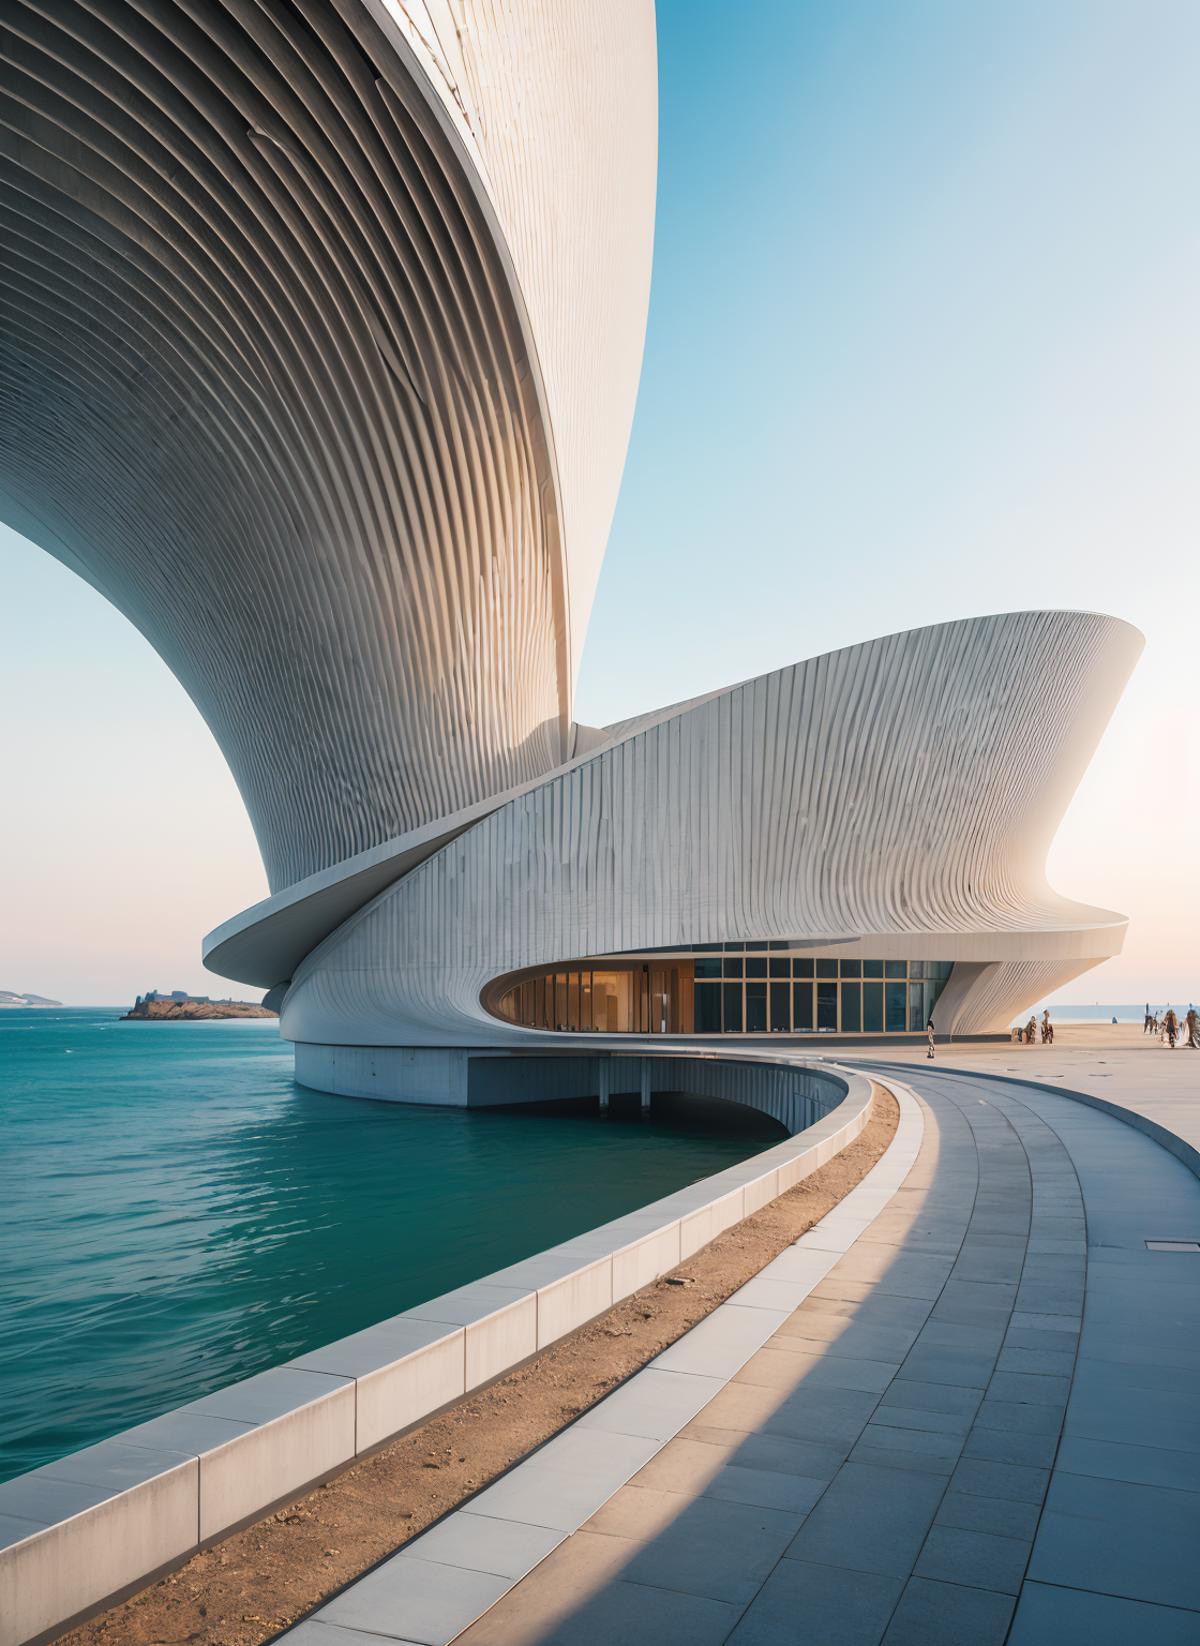 Curved_architecture image by OsTri